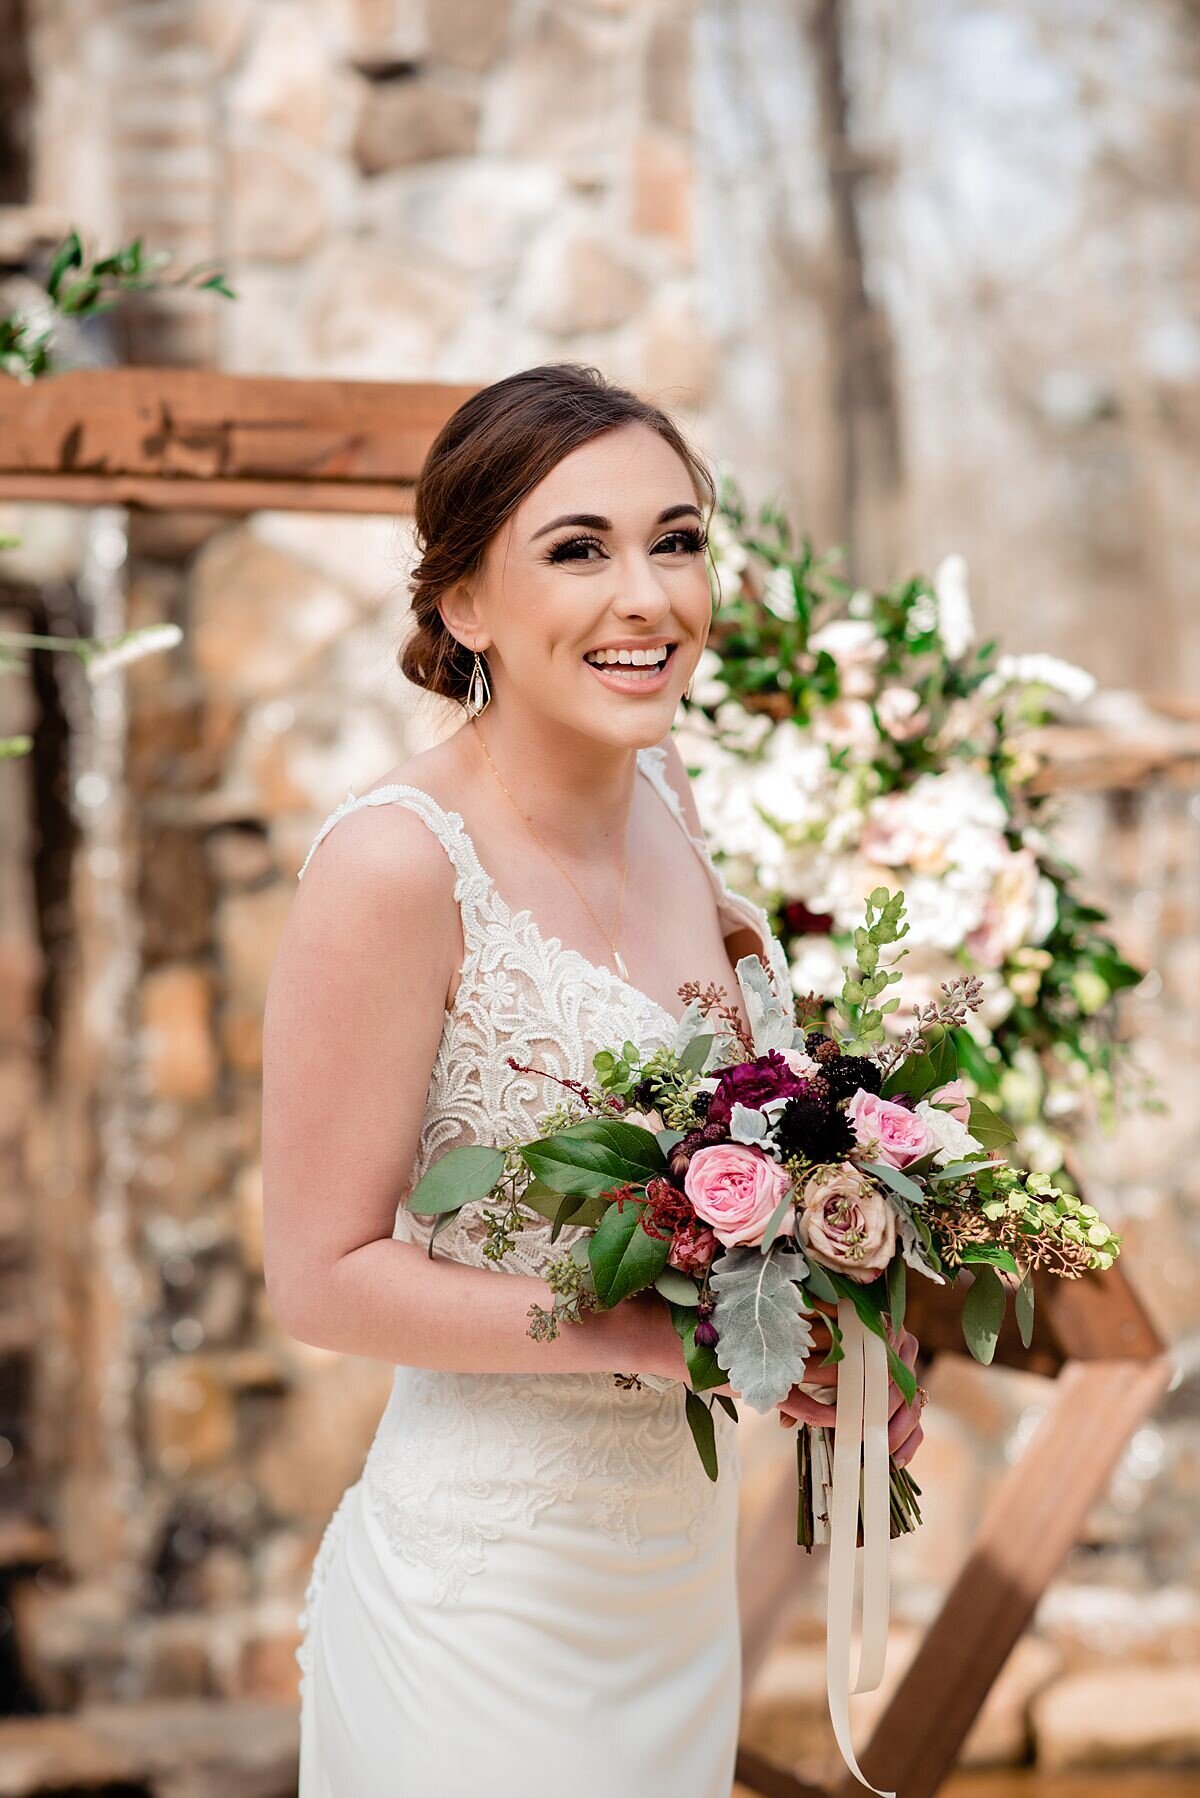 The bride stands at the wooden arbor in a lace, fitted wedding dress with lace straps. She is holding a horizontal bouquet of burgundy and blush roses and greenery accented by long sheer ribbons. The arbor behind them has a large spray of blush and ivory flowers with greenery.